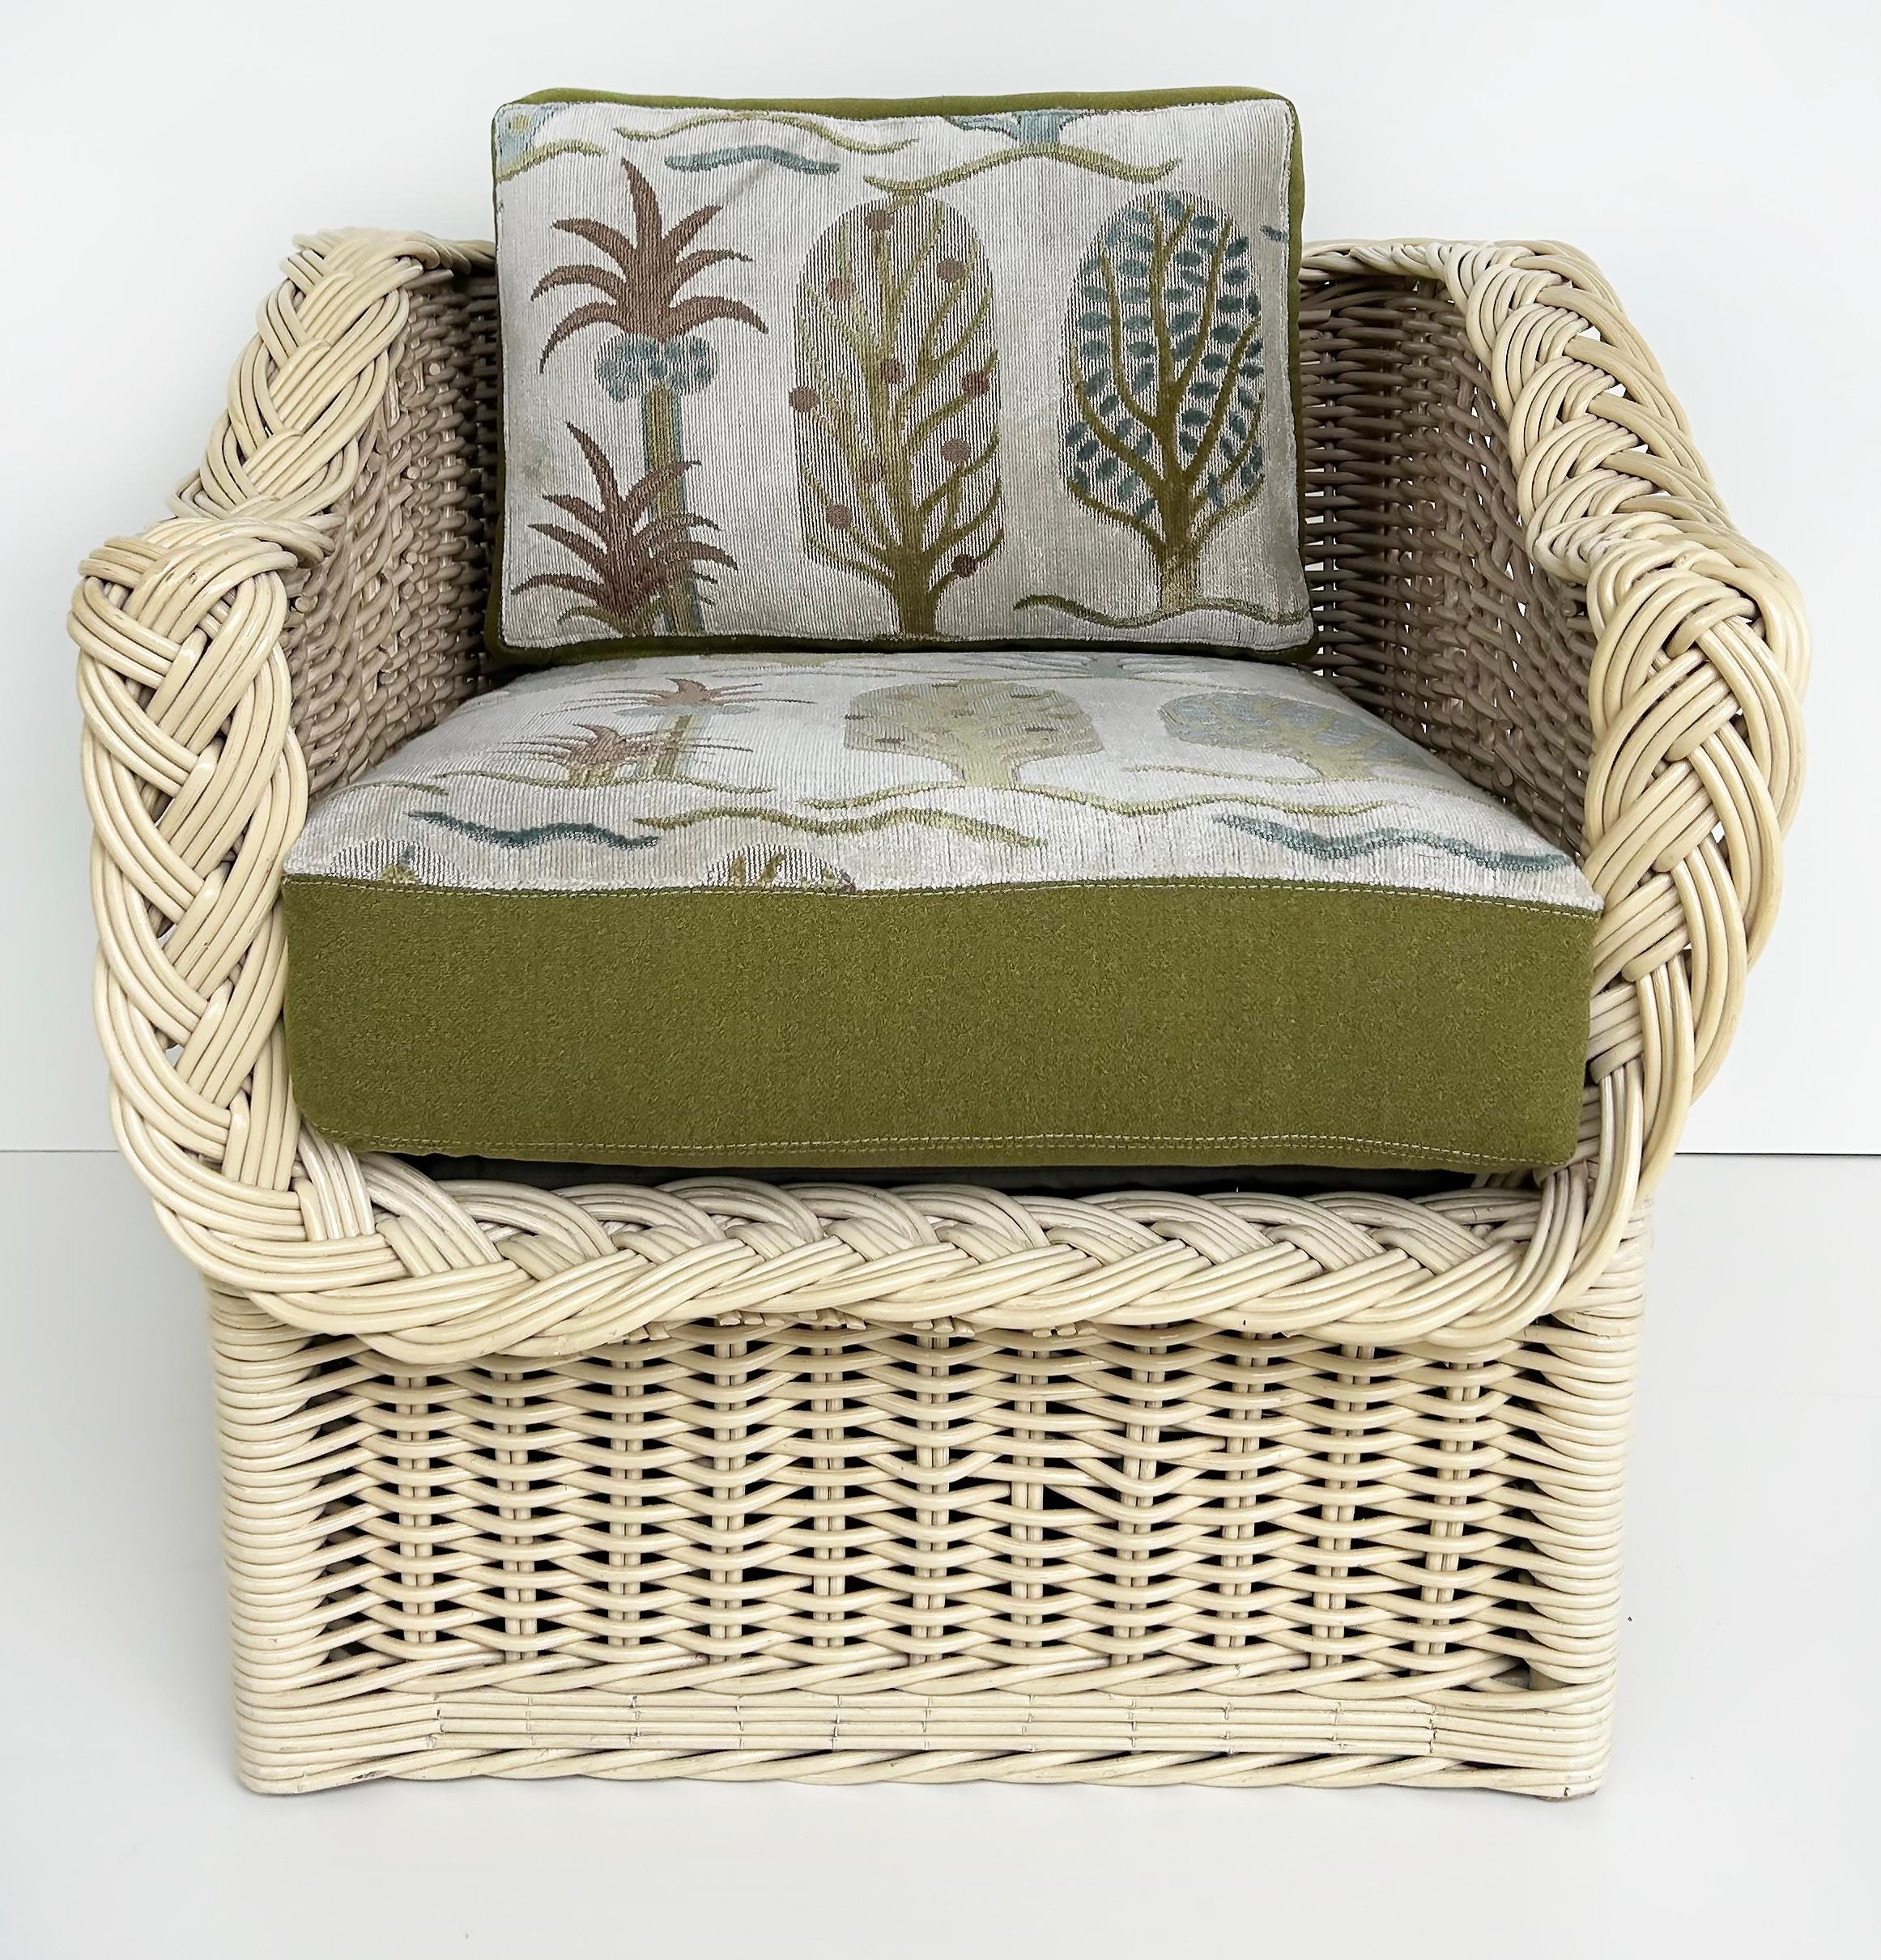 Henry Link Coastal Newly Upholstered Rattan Club Chairs, Painted Pair

Offered for sale is a pair of coastal beach living Henry Link painted rattan club chairs which were just upholstered with Clarence House fabric. The chairs are well made with